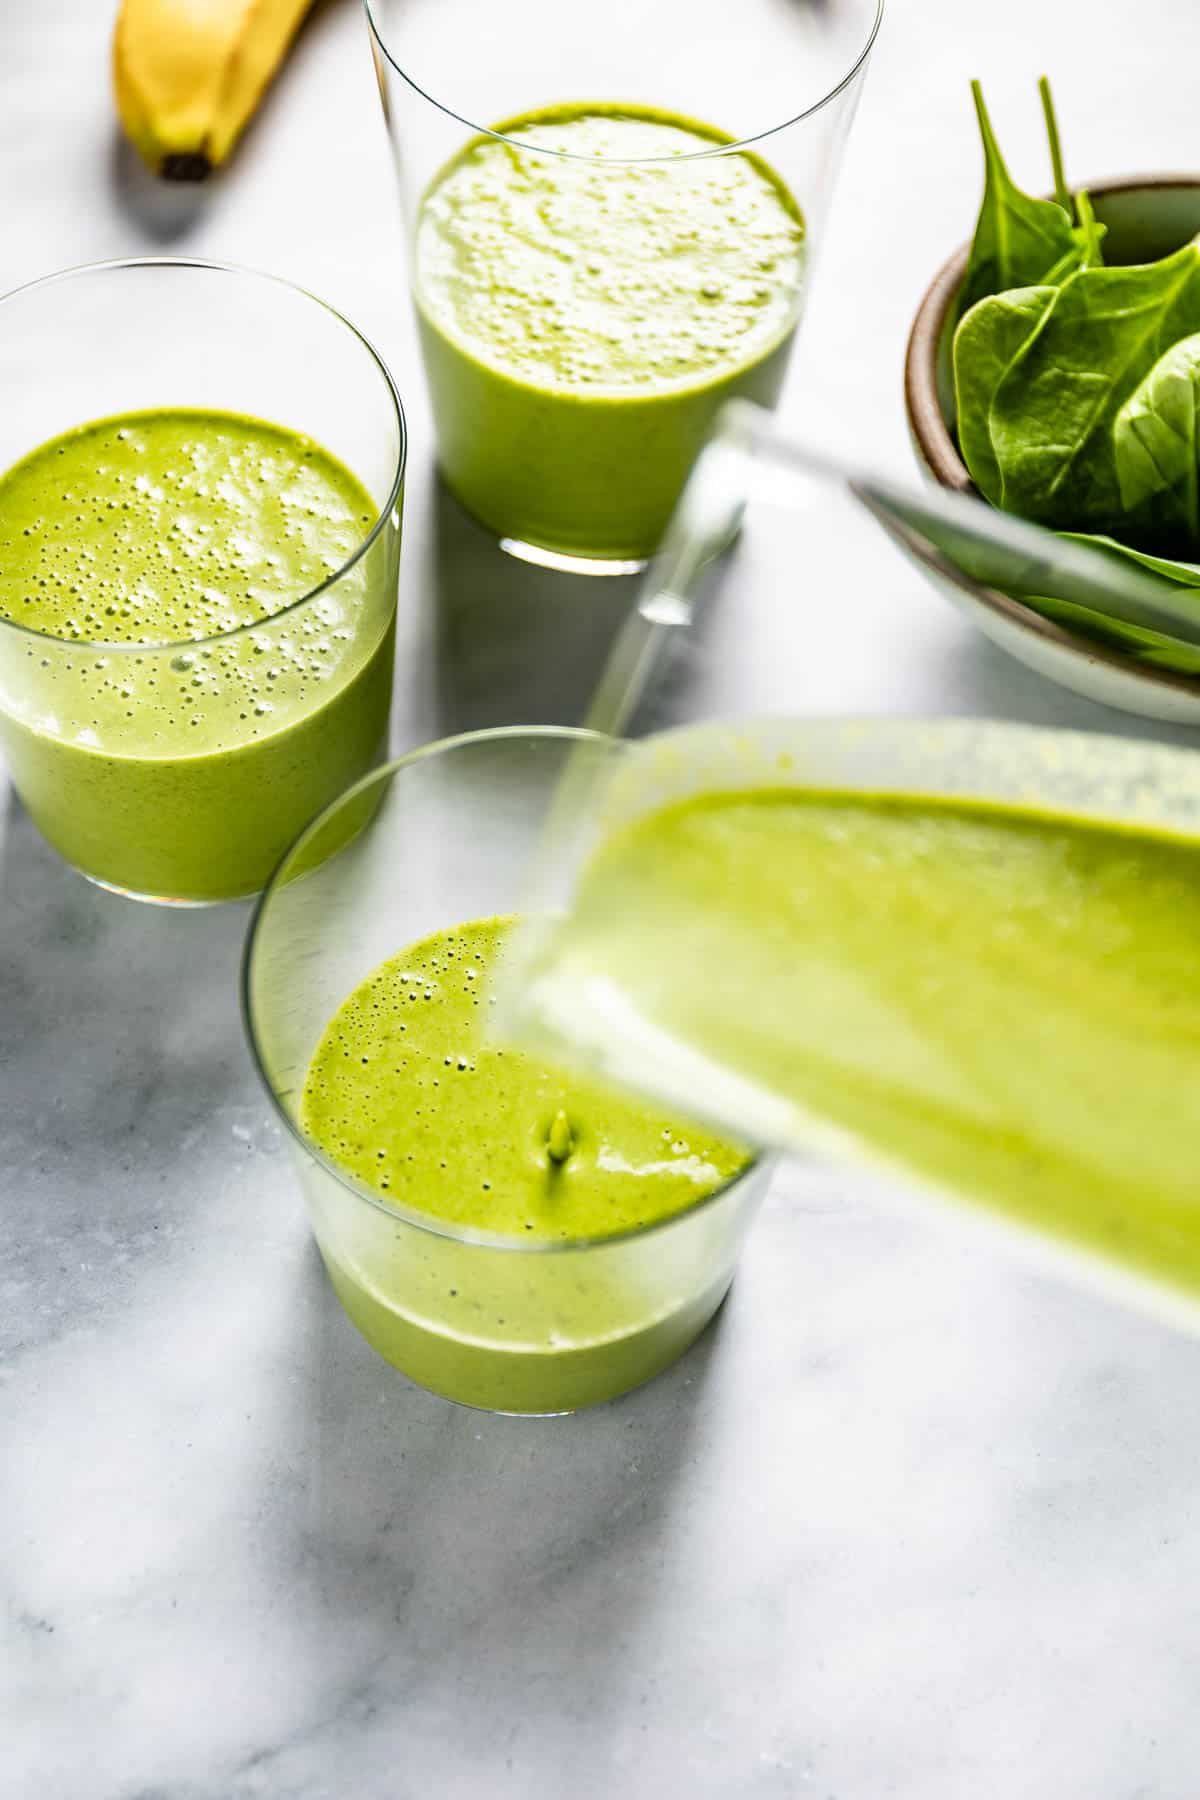 A person pouring smoothie with spinach and banana in a glass.